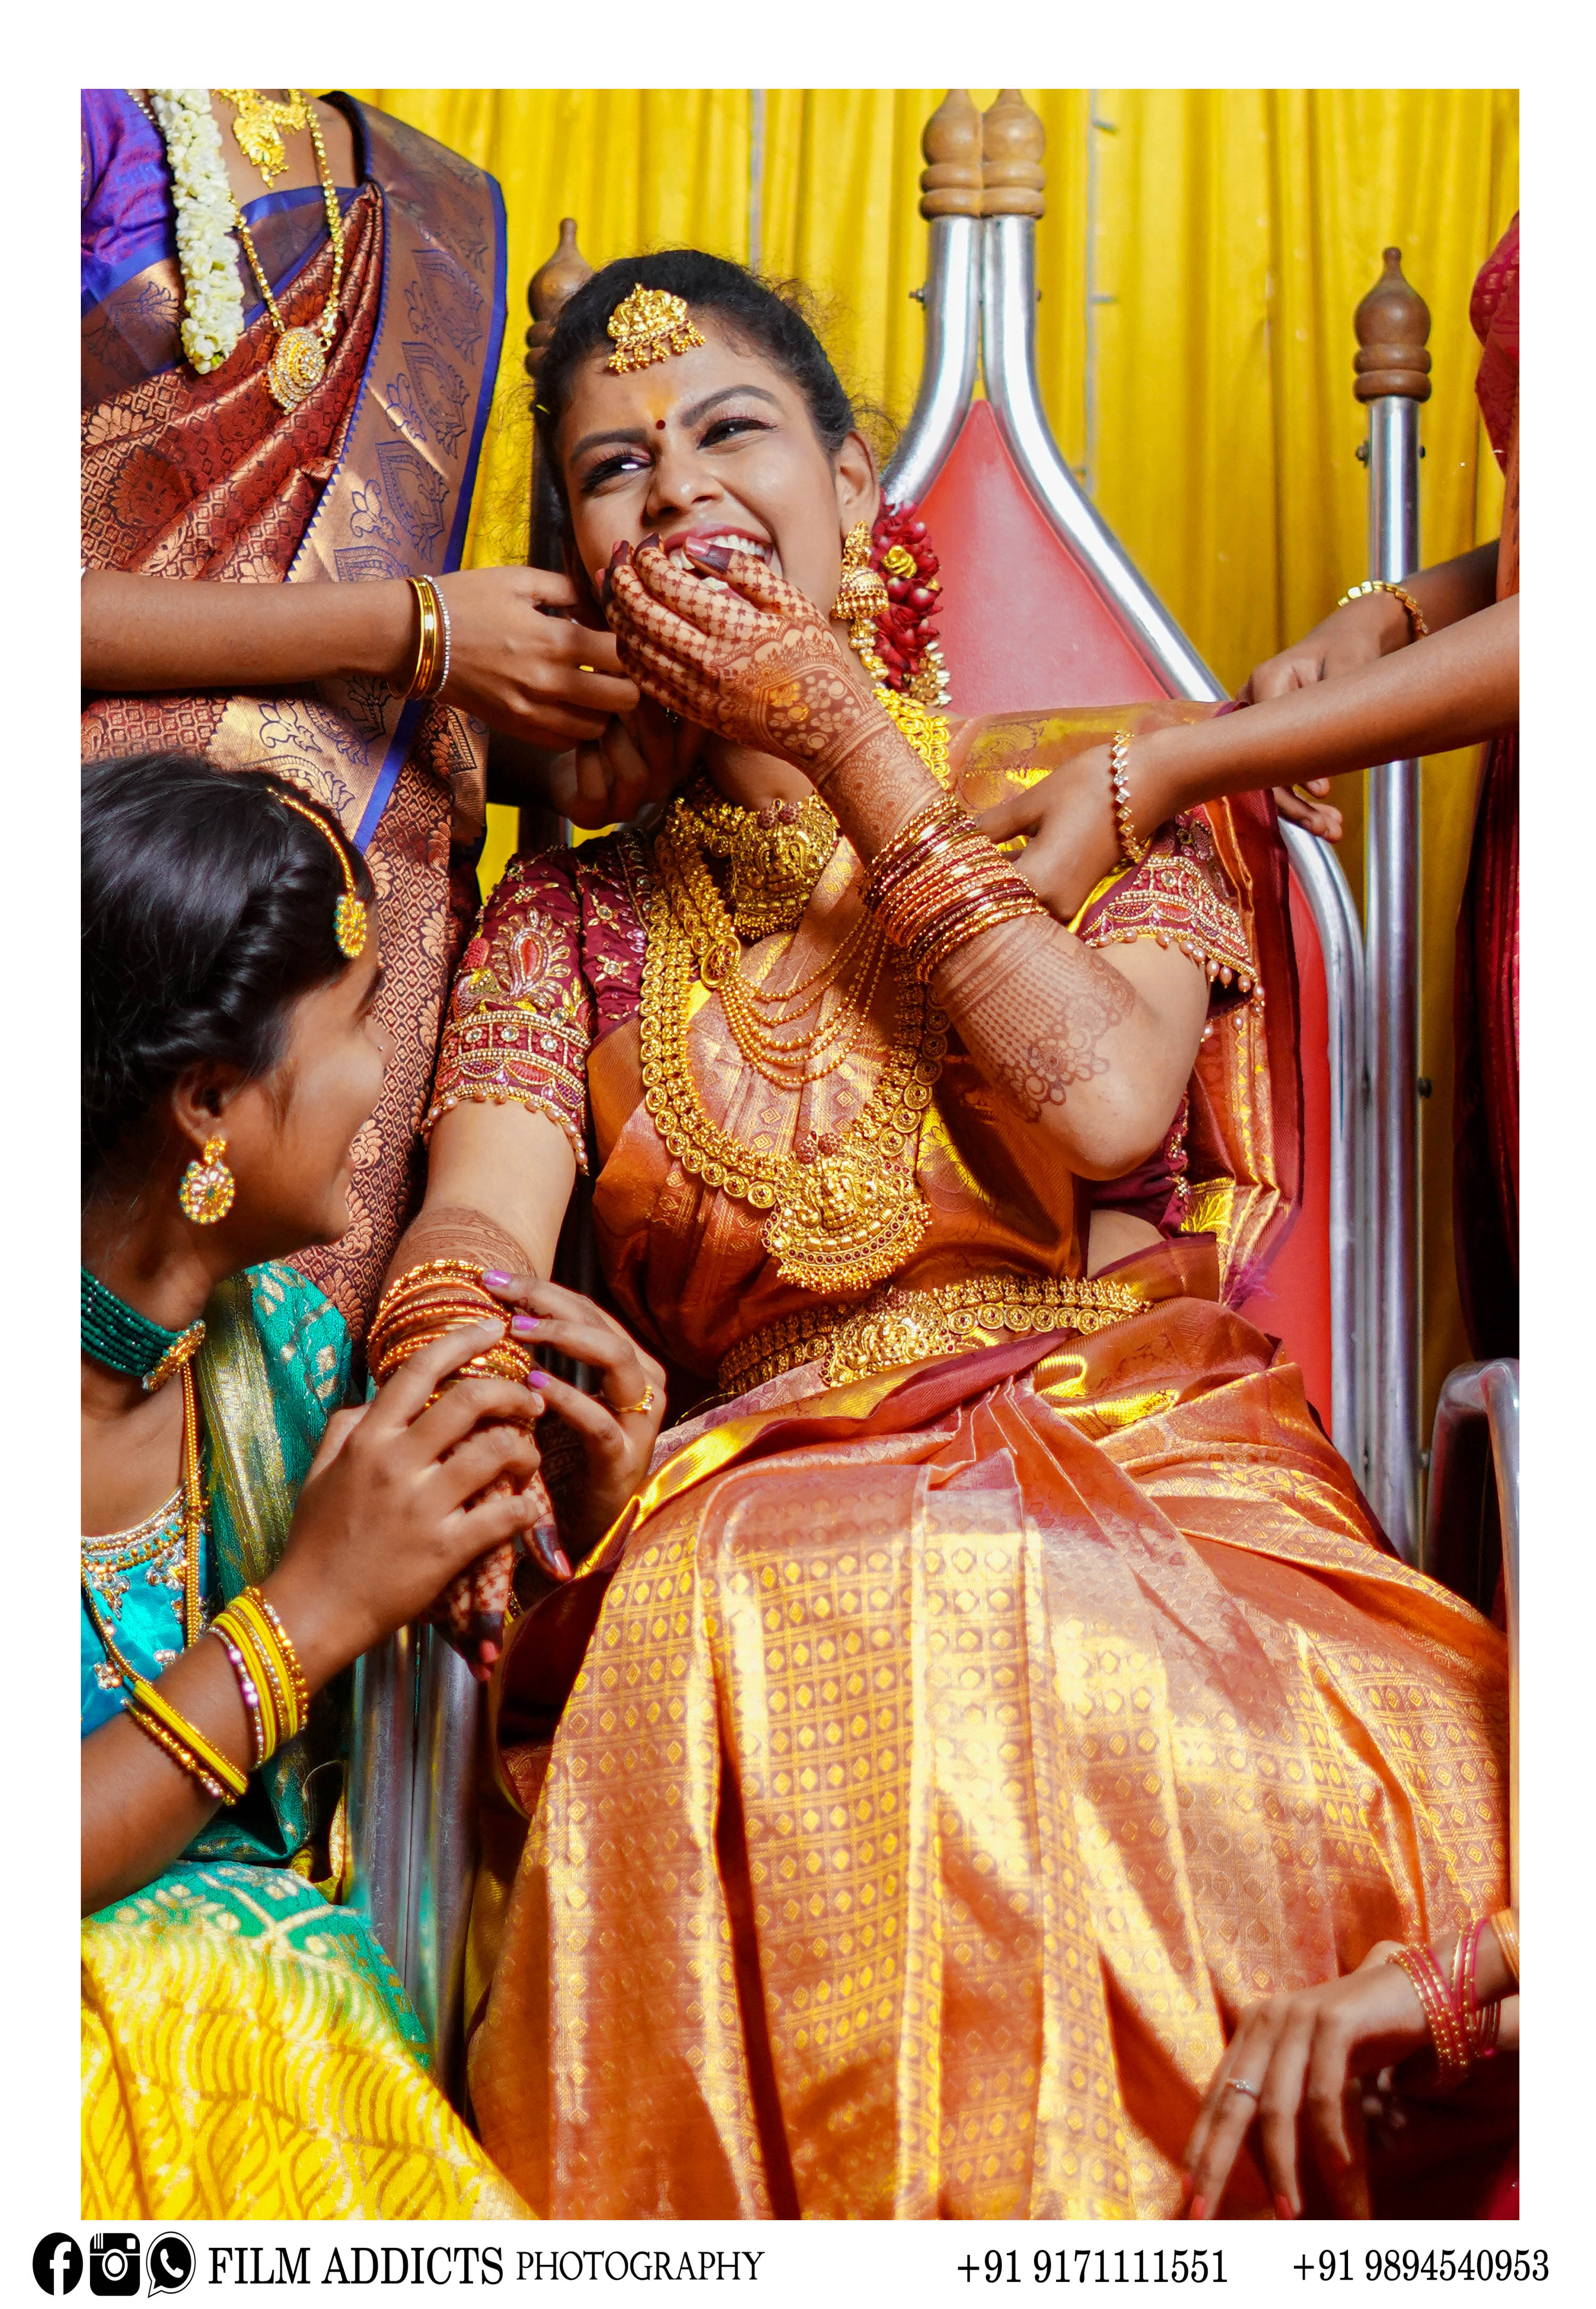 Best Puberty Photography in Sivaganga-FilmAddicts Photography, Best Candid photographers in sivagangai, Best wedding candid photographers in sivagangai, Best Photographers in sivagangai, Best Marraige photographers in sivagangai, Best wedding photography in sivagangai, Best wedding candid photography in sivagangai, Best Marraige photography in sivagangai, Best Photography in sivagangai, Best wedding video in sivagangai, Best wedding videography in sivagangai, Best Helicam operator in sivagangai, Best Drone Operator in sivagangai, Best wedding studio in sivagangai, Best proffesional photographers in sivagangai, No.1 Wedding Photographers in sivagangai, No.1 wedding photography in sivagangai, sivagangai wedding photographers, sivagangai wedding photography, sivagangai wedding Videos in sivagangai,Best Wedding photographers in Madurai, Best Candid photographers in Madurai, Best wedding candid photographers in Madurai, Best Photographers in Madurai,Best Marraige photographers in Madurai,Best wedding photography in Madurai, Best wedding candid photography in Madurai, Best Marraige photography in Madurai, Best Photography in Madurai, Best wedding video in Madurai, Best wedding videography in Madurai, Best Helicam operator in Madurai, Best Drone Operator in Madurai, Best wedding studio in Madurai, Best proffesional photographers in Madurai, No.1 Wedding Photographers in Madurai, No.1 wedding photography in Madurai, Madurai wedding photographers, Madurai wedding photography, Madurai wedding Videos in Madurai, Best Wedding photographers in TamilNadu.